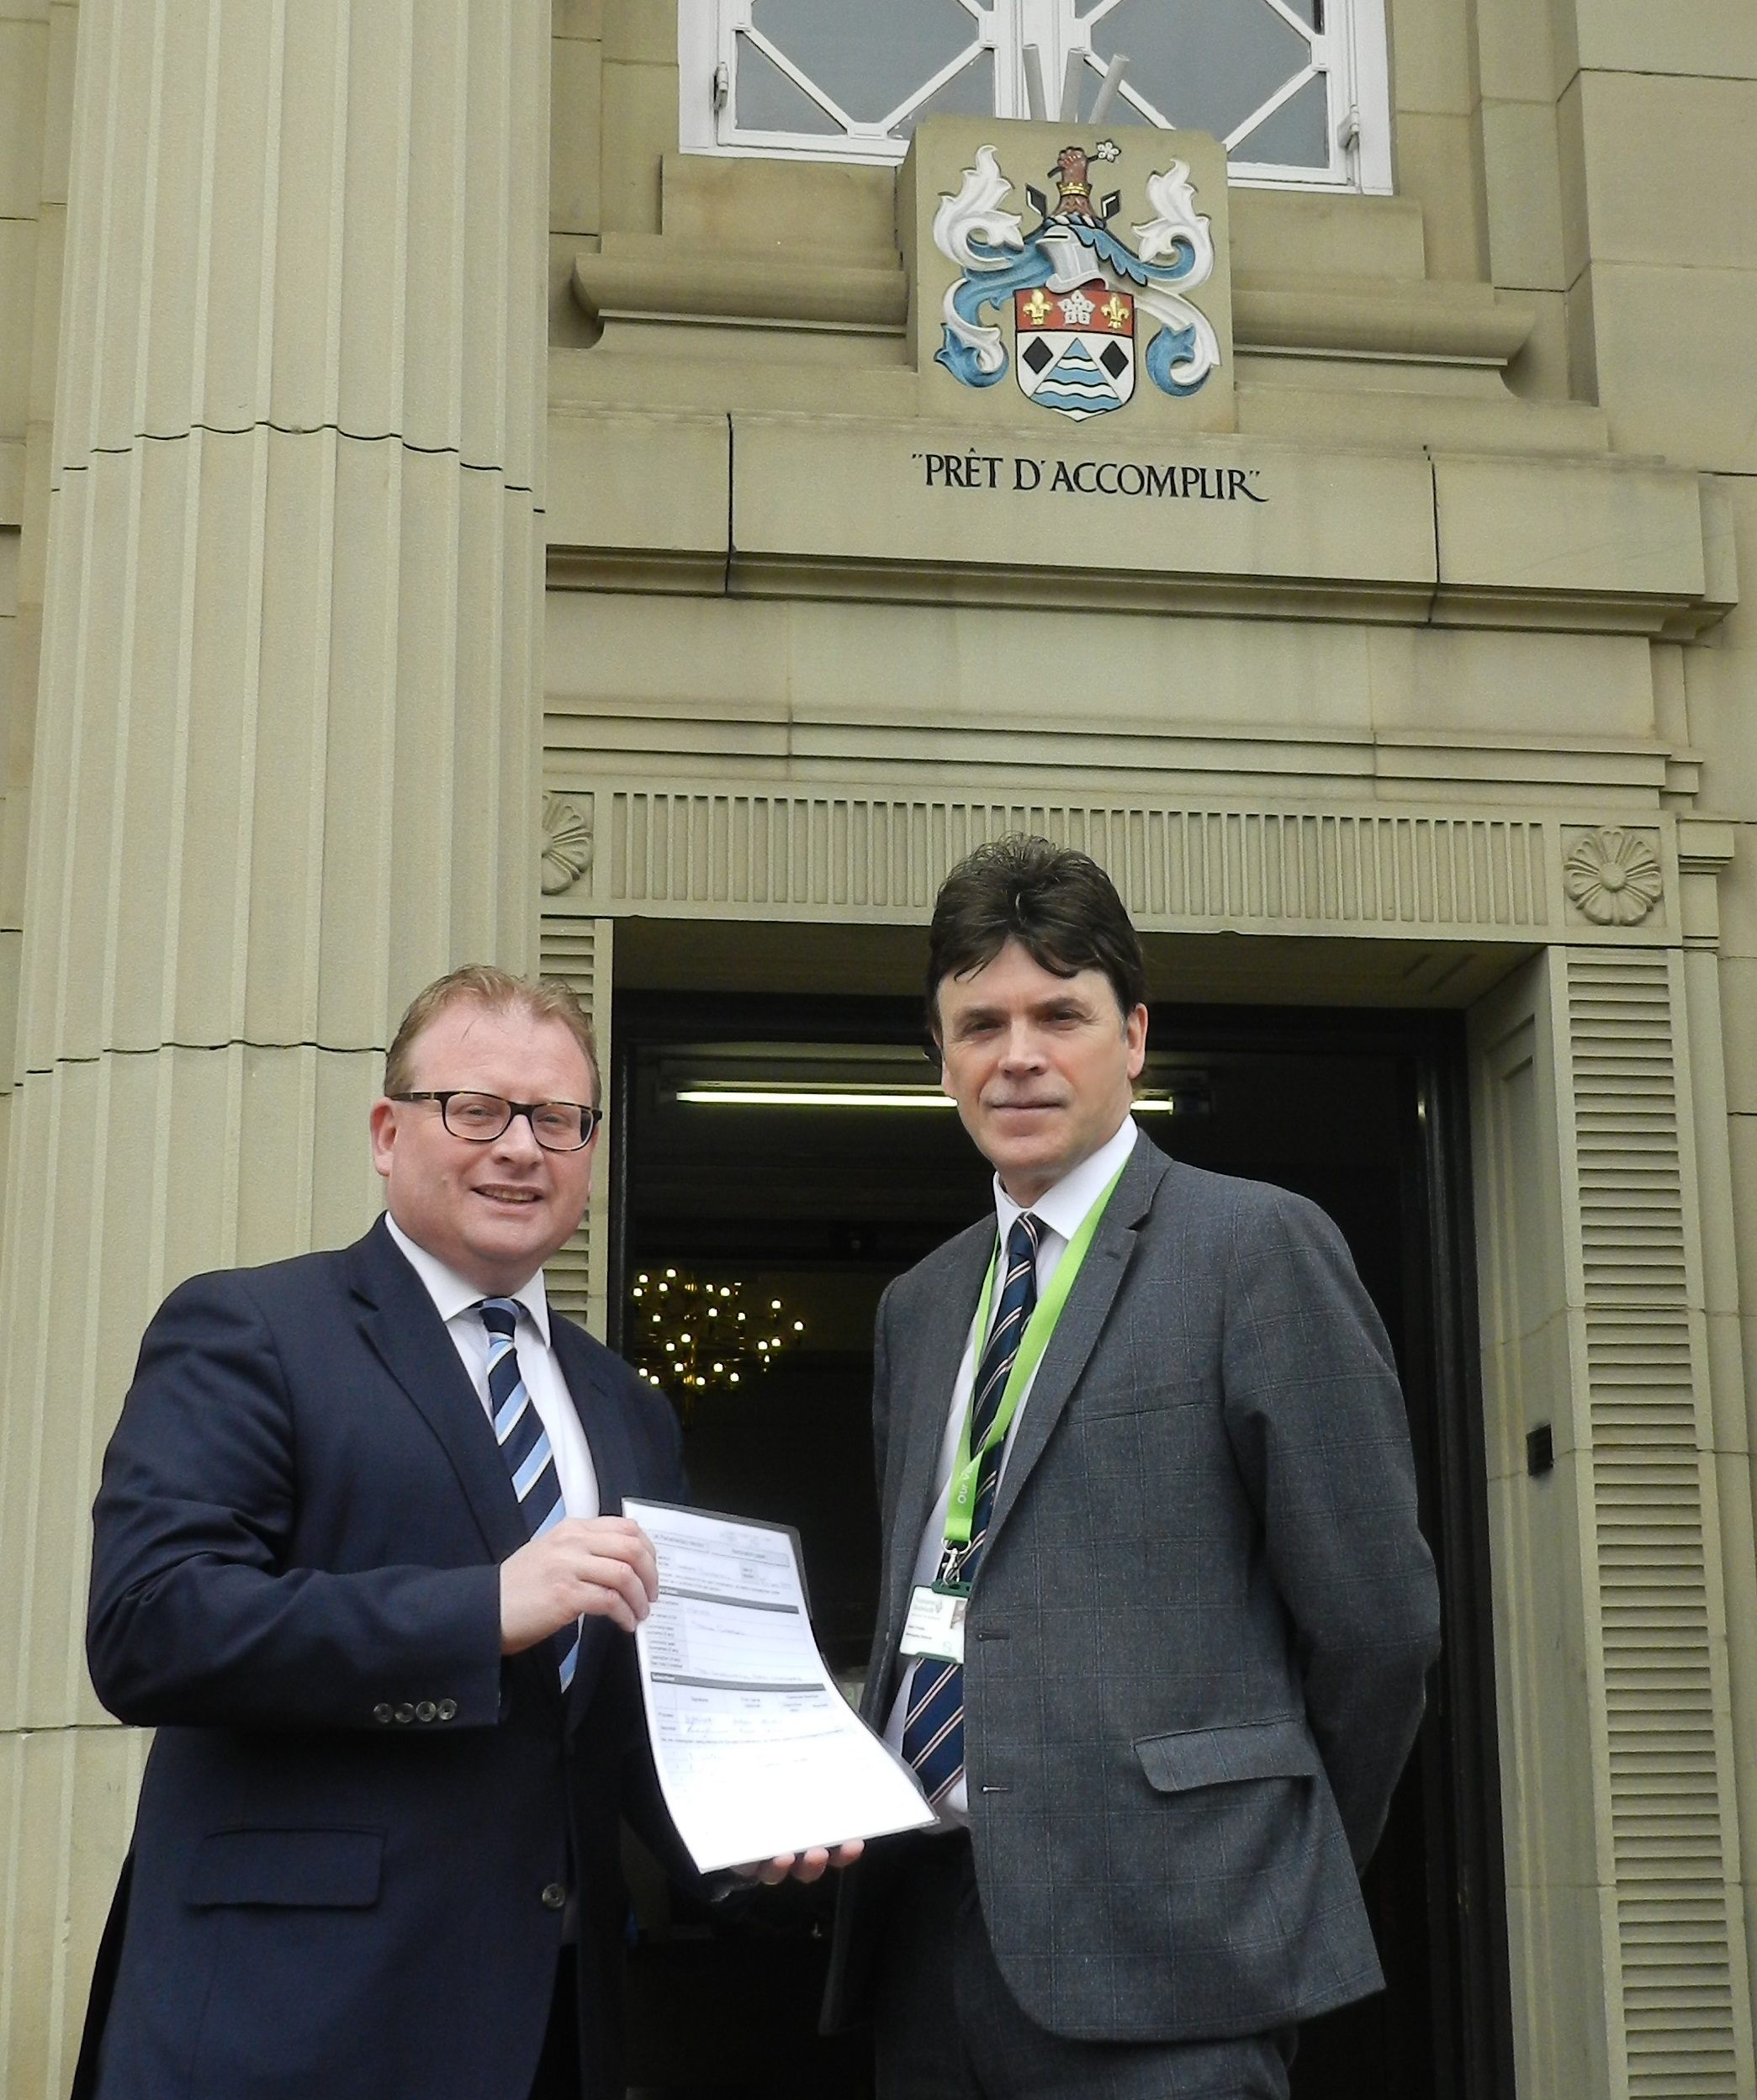 Marcus delivering his nomination papers.